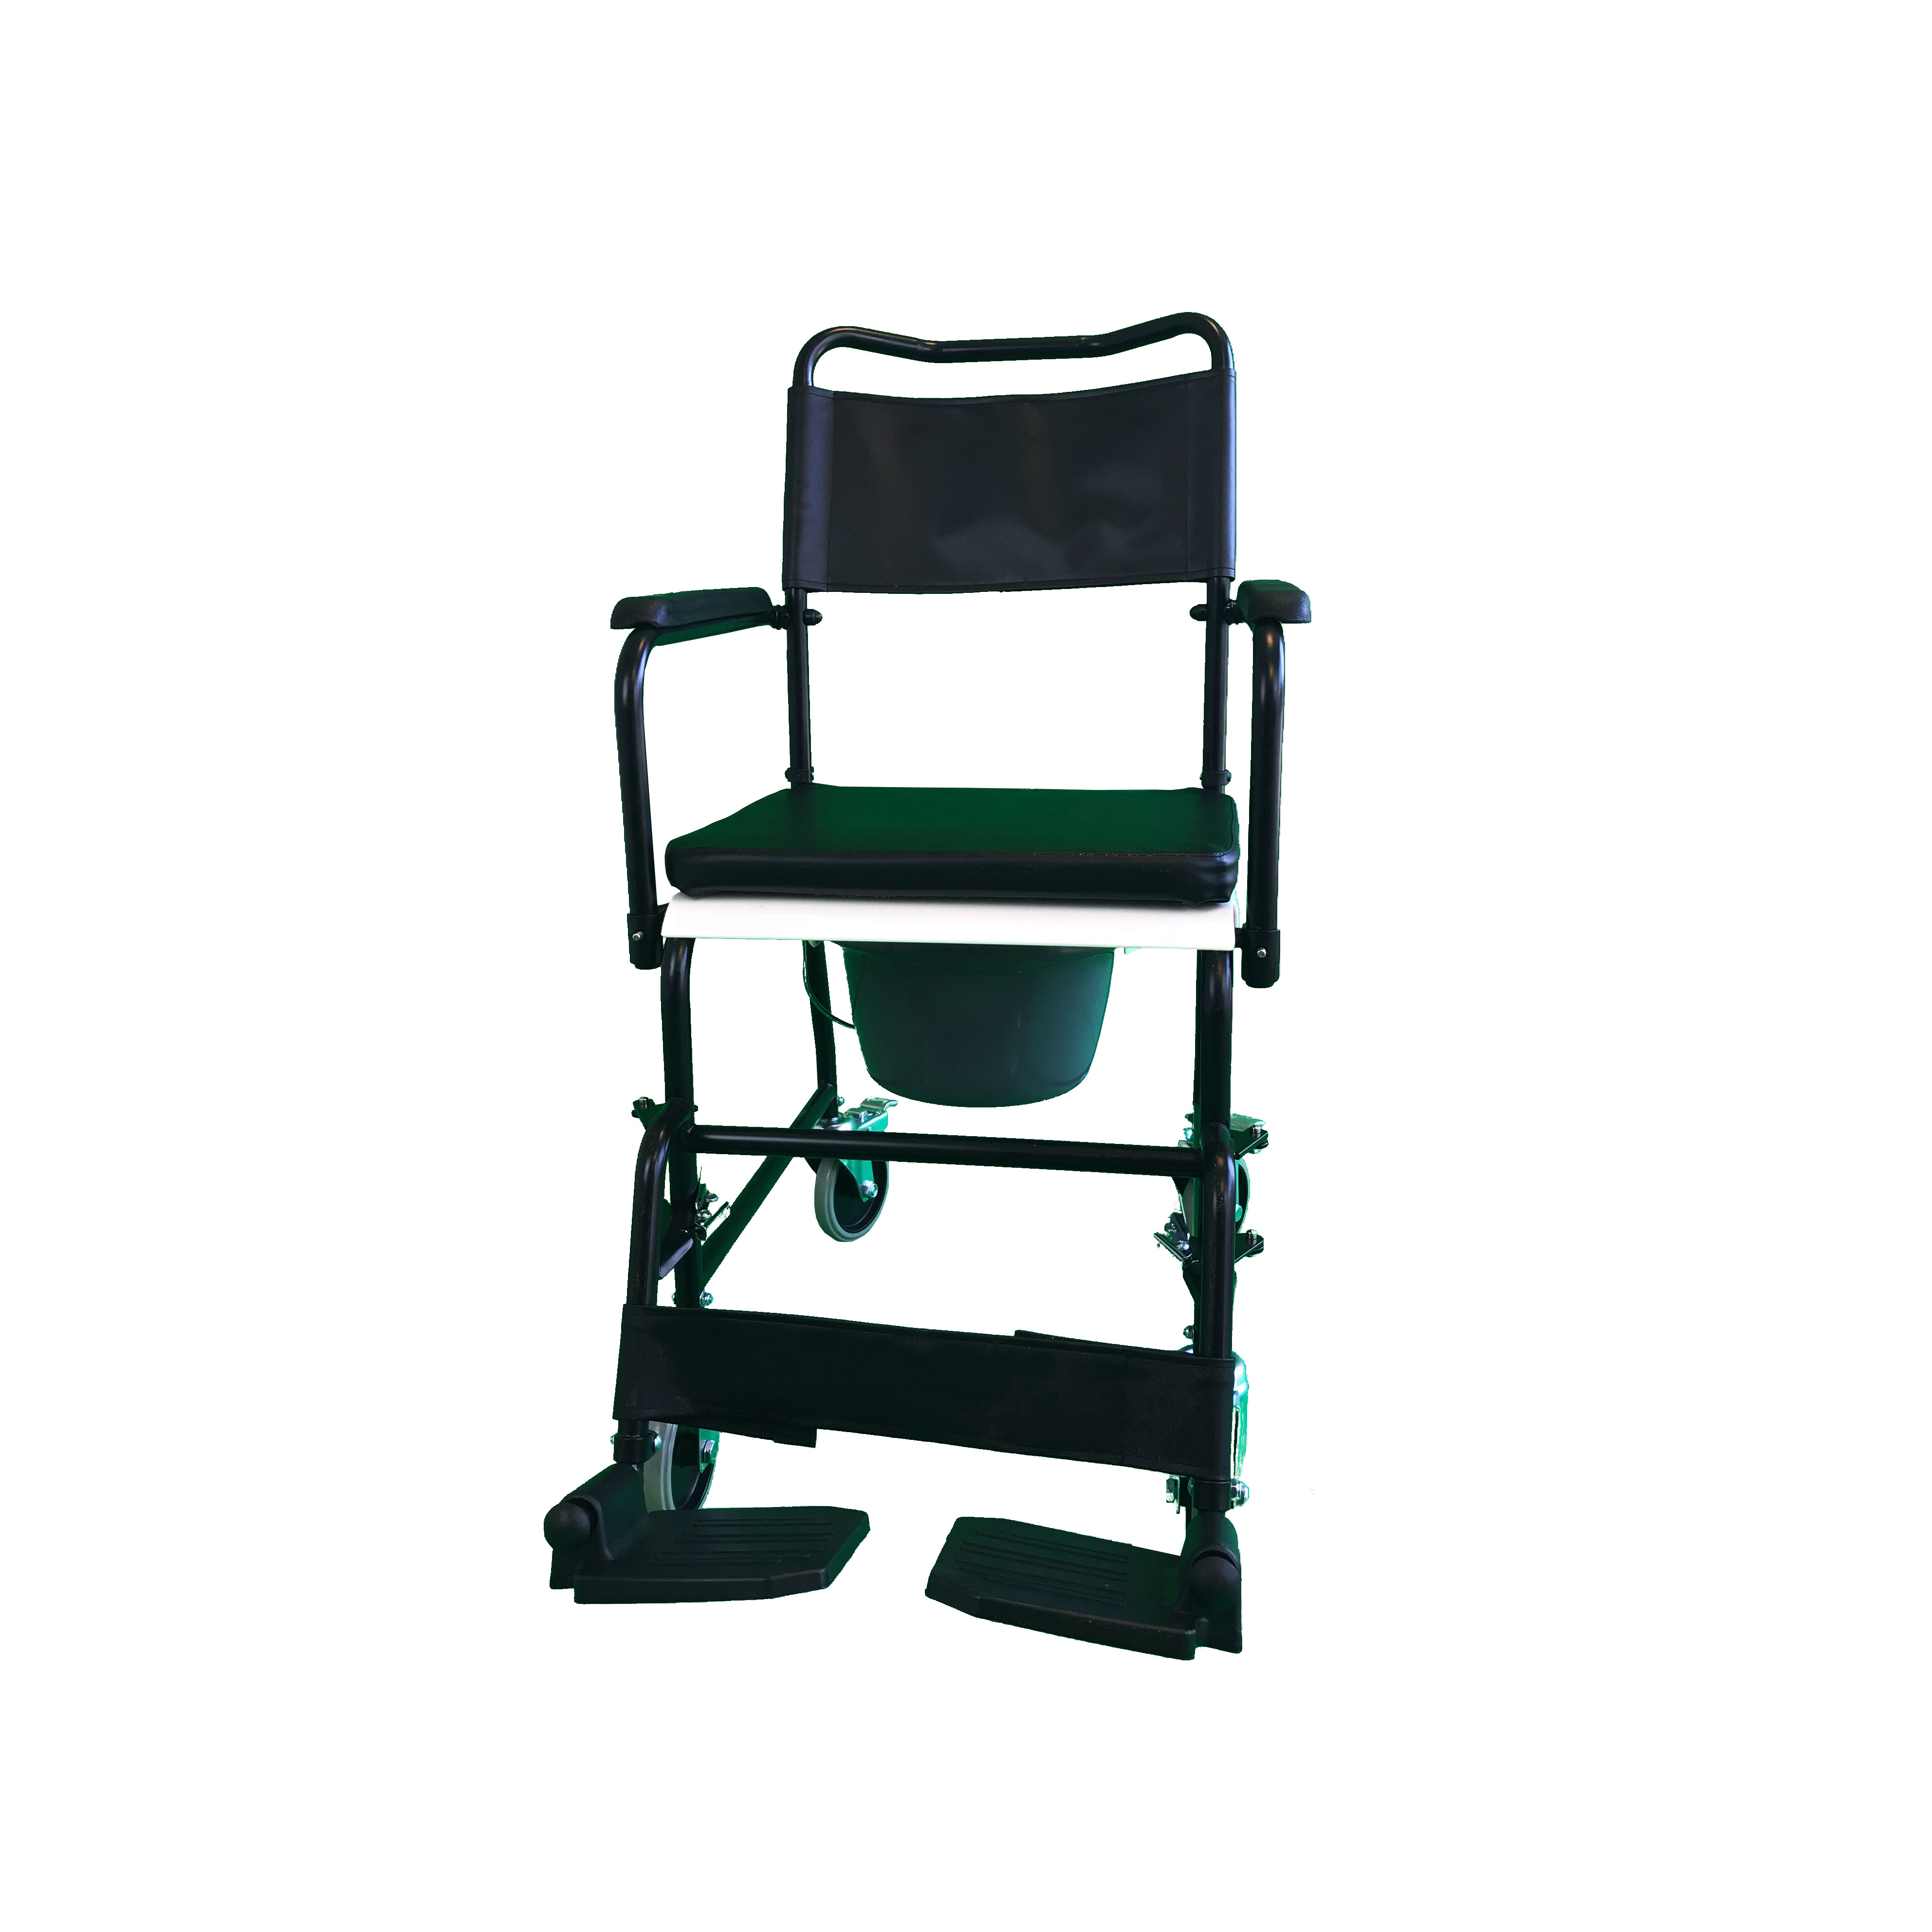 COMCH-01 Romed commode chair, mobile, per piece in a carton.